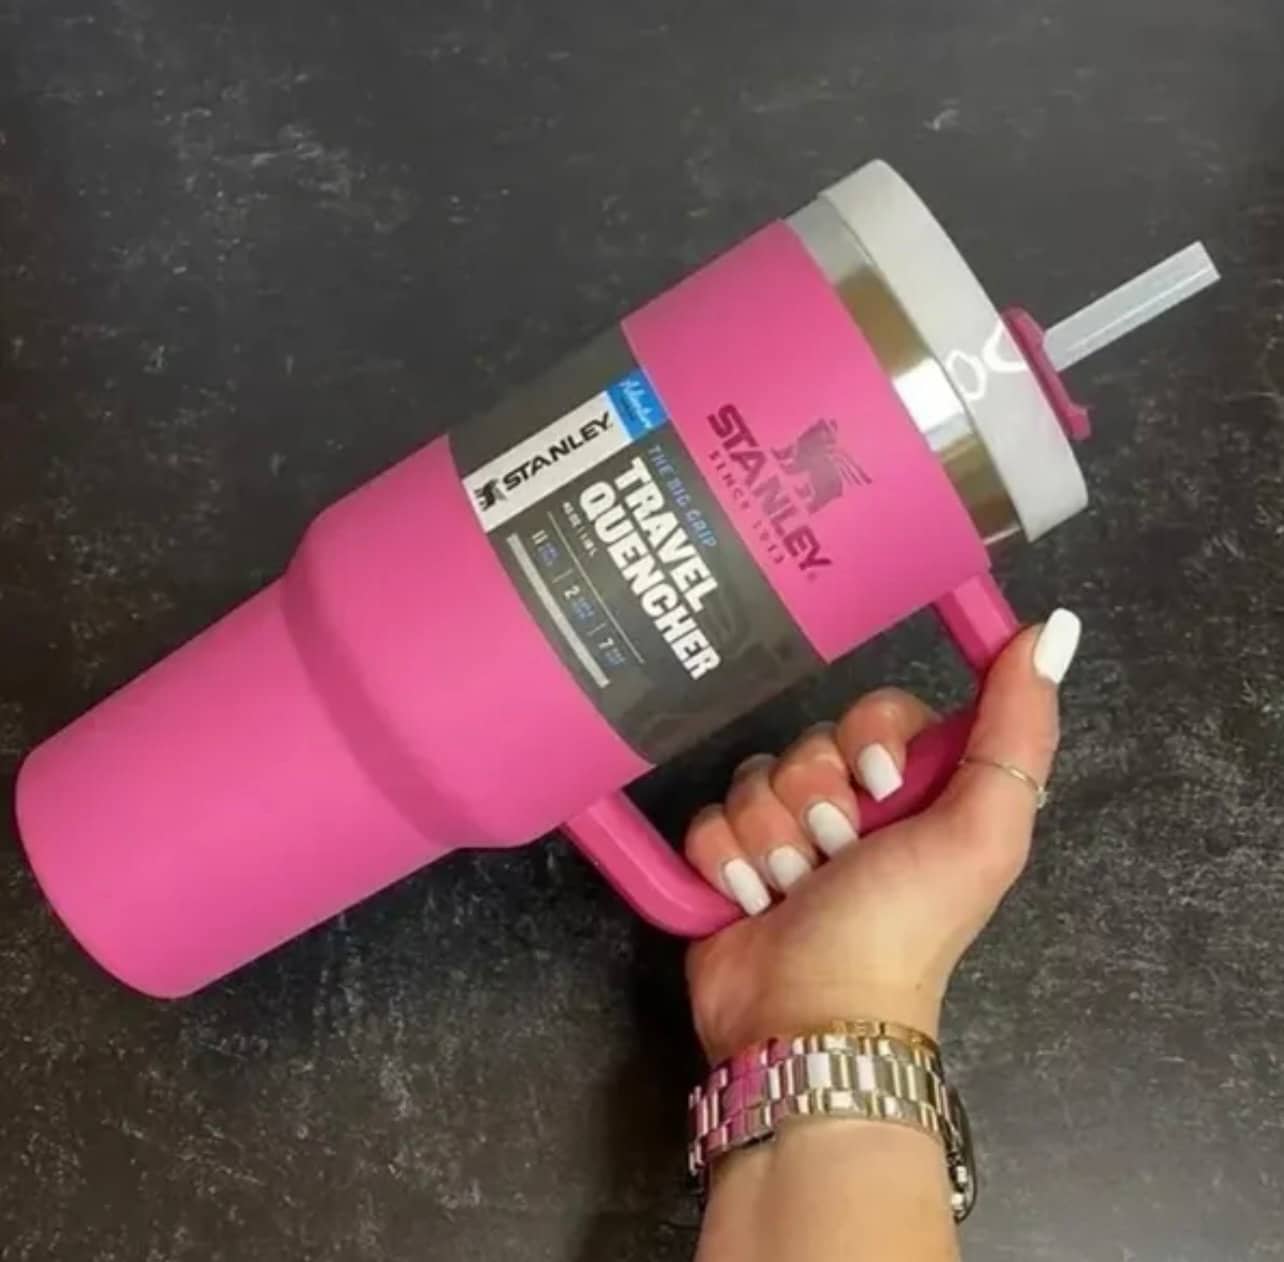 Stanley Straw Topper Stanley Cup Accessories Drink Cup Cover For Stanley  Tumbler Straw Cap Reusable Straw Cover Stanley Topper - Stanley Tumbler -  Stylish Stanley Tumbler - Pink Barbie Citron Dye Tie